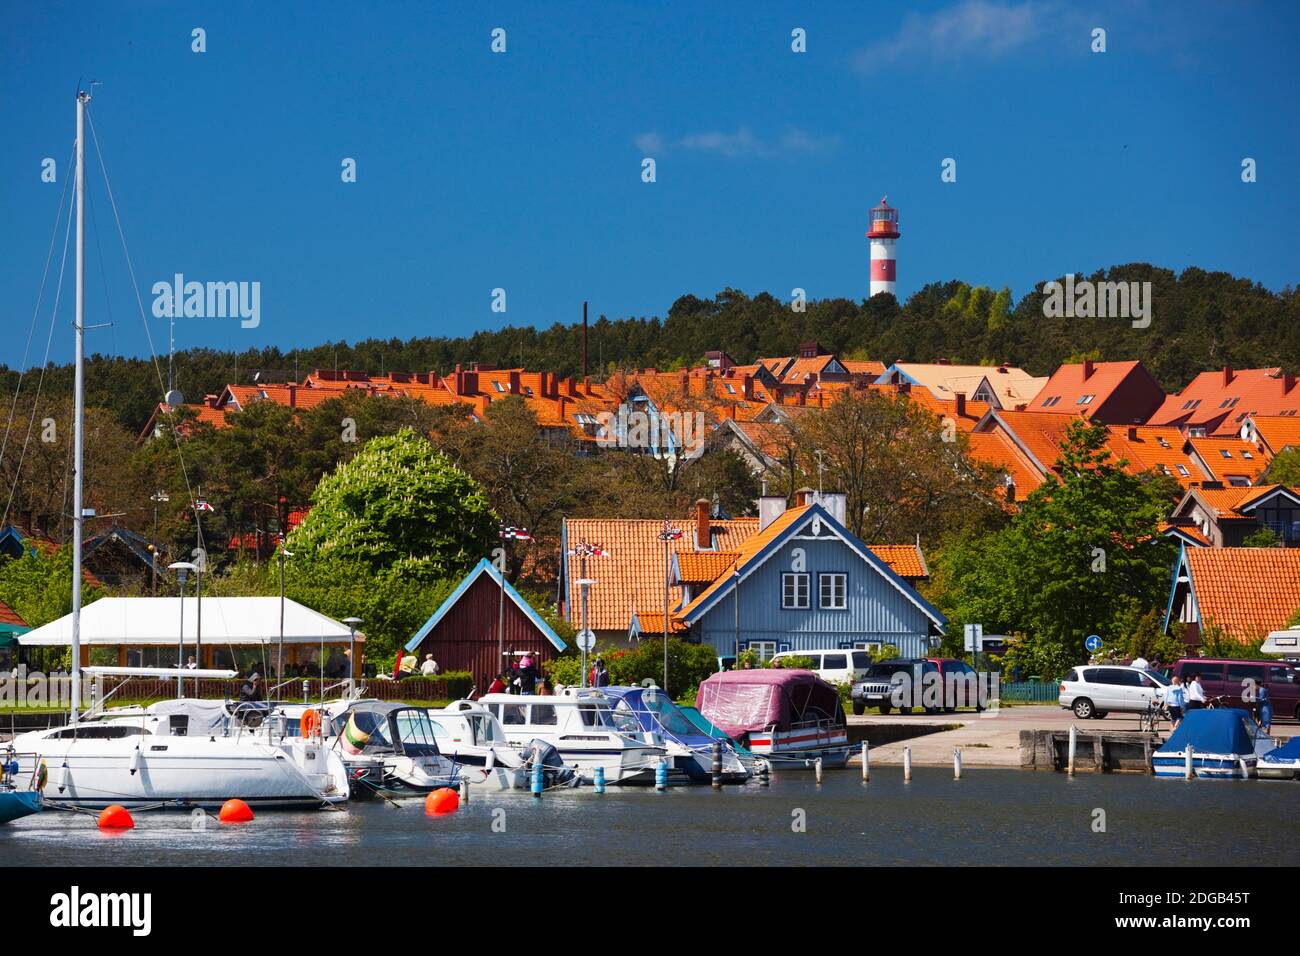 Boats at a harbor with buildings in the background, Nida, Curonian Spit, Lithuania Stock Photo